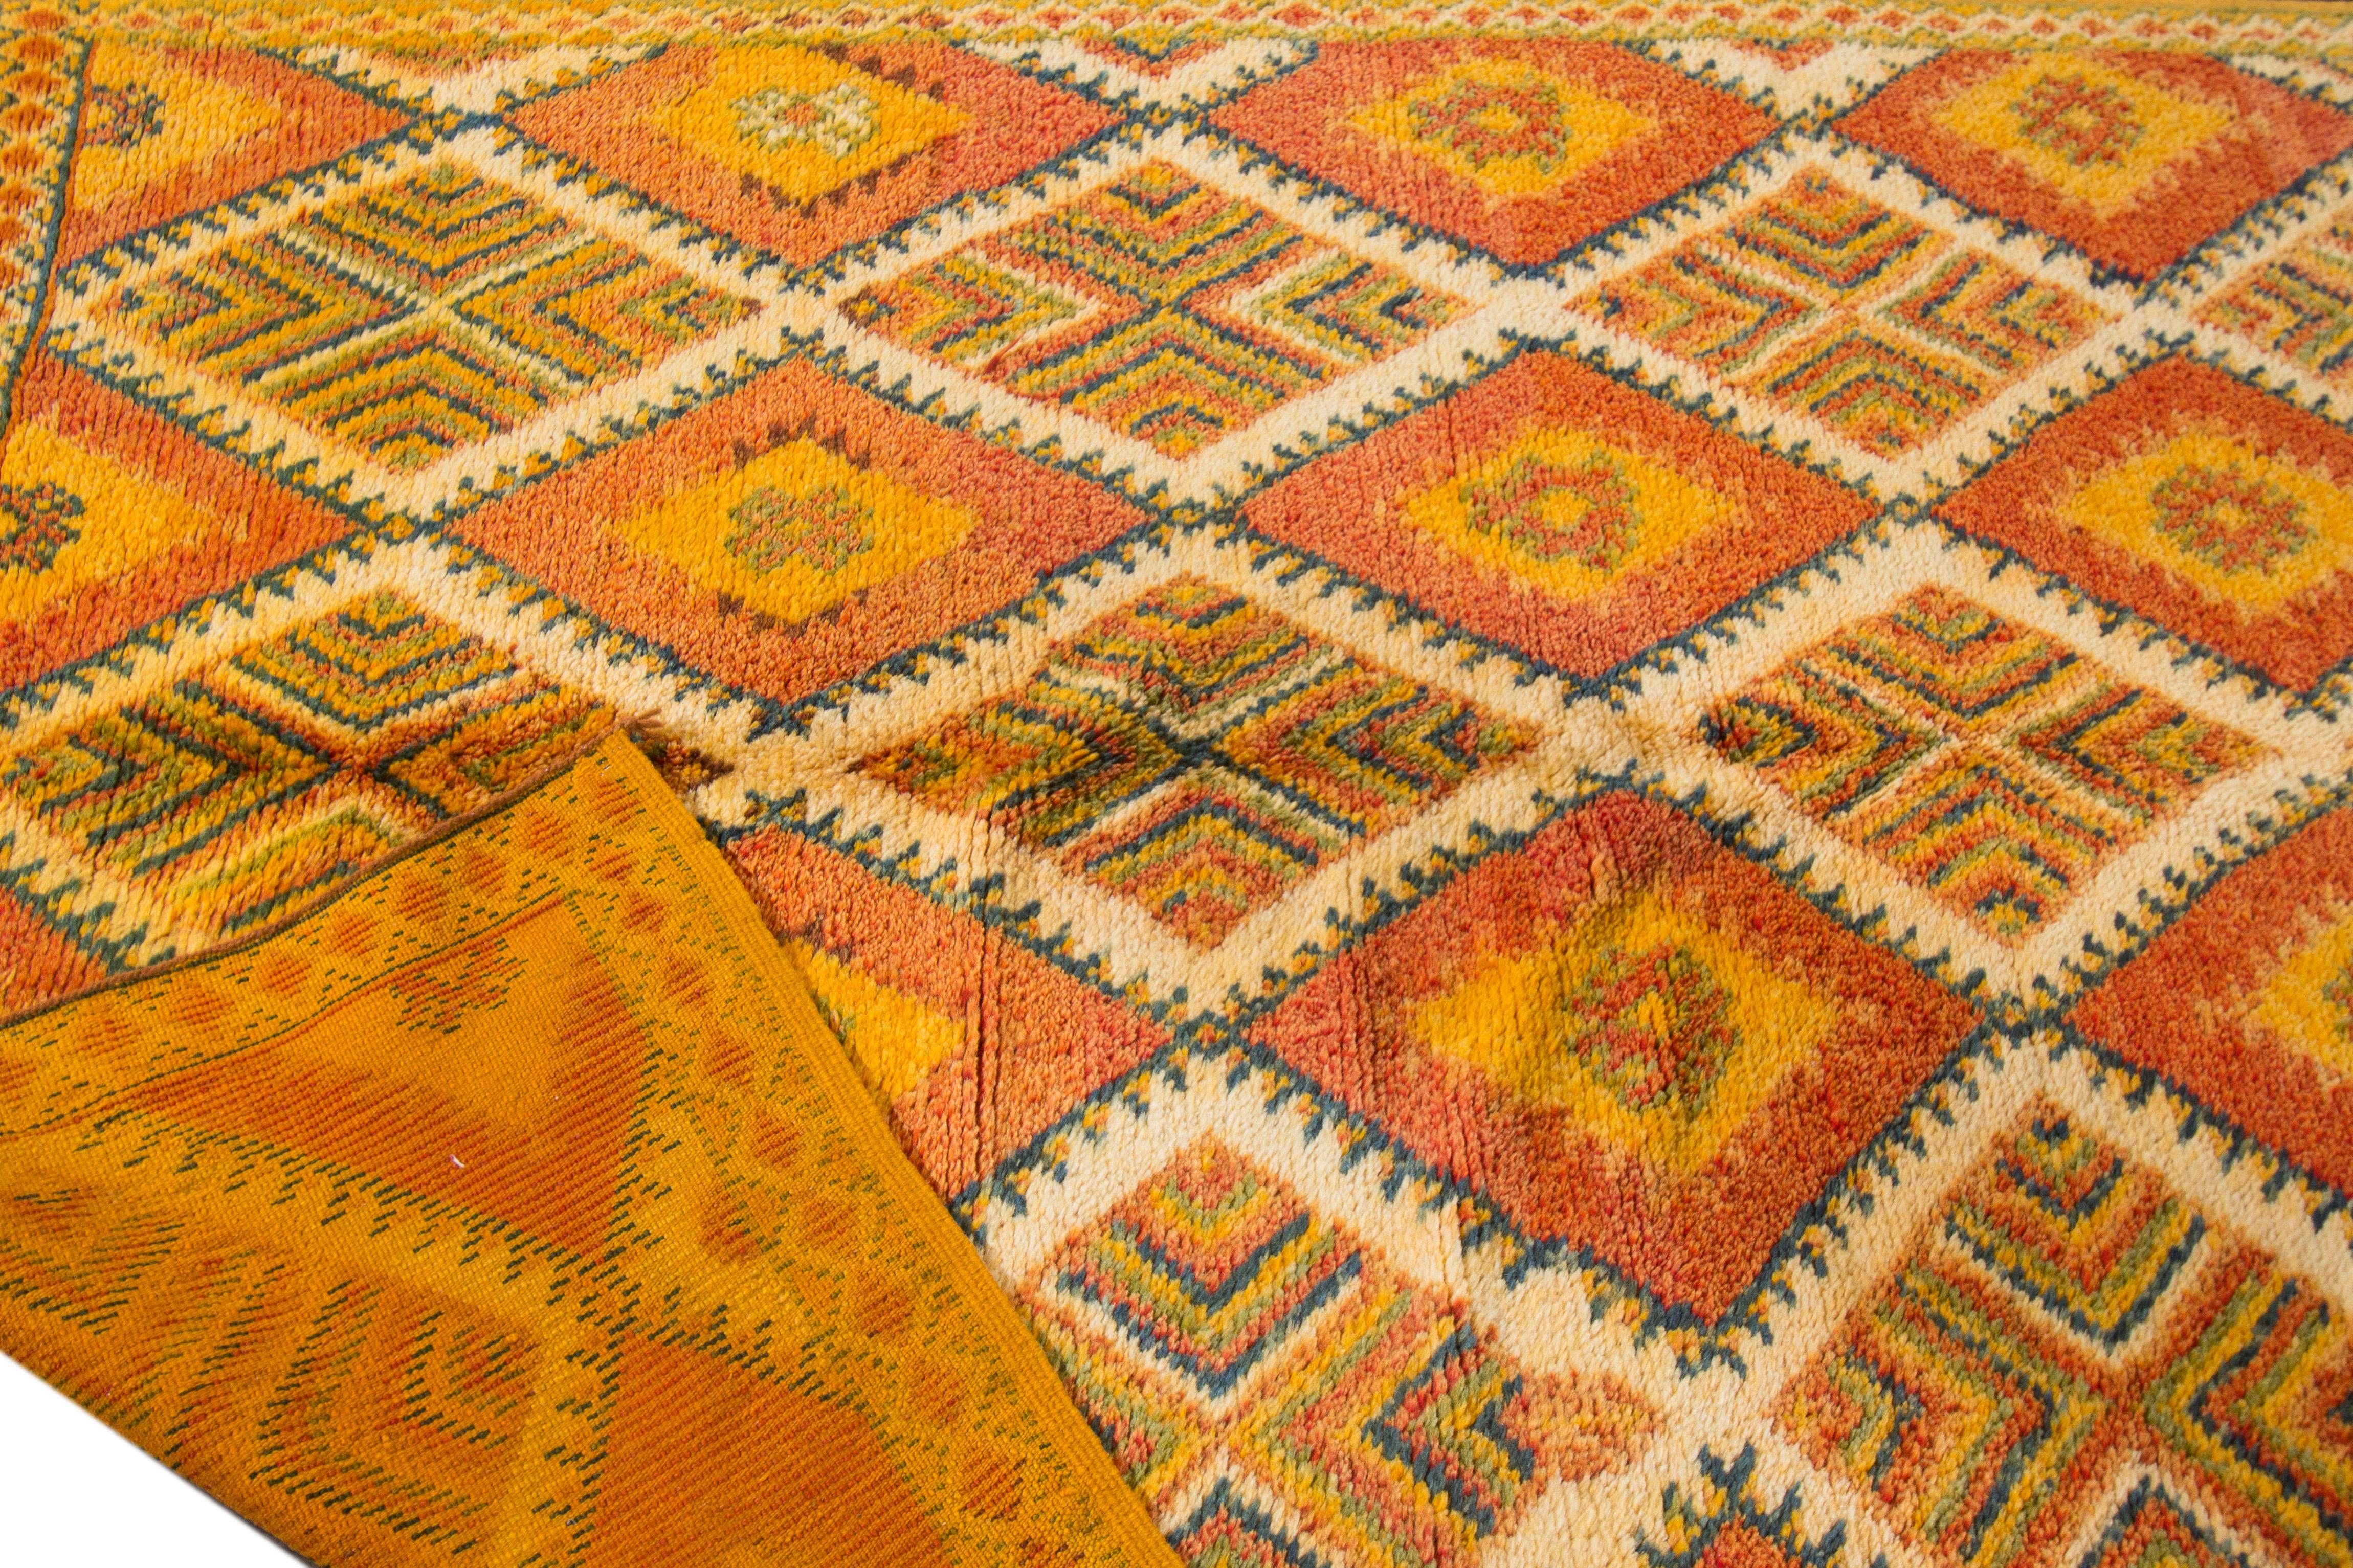 Beautiful Vintage Moroccan hand-knotted Wool rug with an orange field, This Moroccan rug has green, yellow, and blue accents in a gorgeous all-over geometric diamond pattern design. 

This rug measures 5' x 11'6